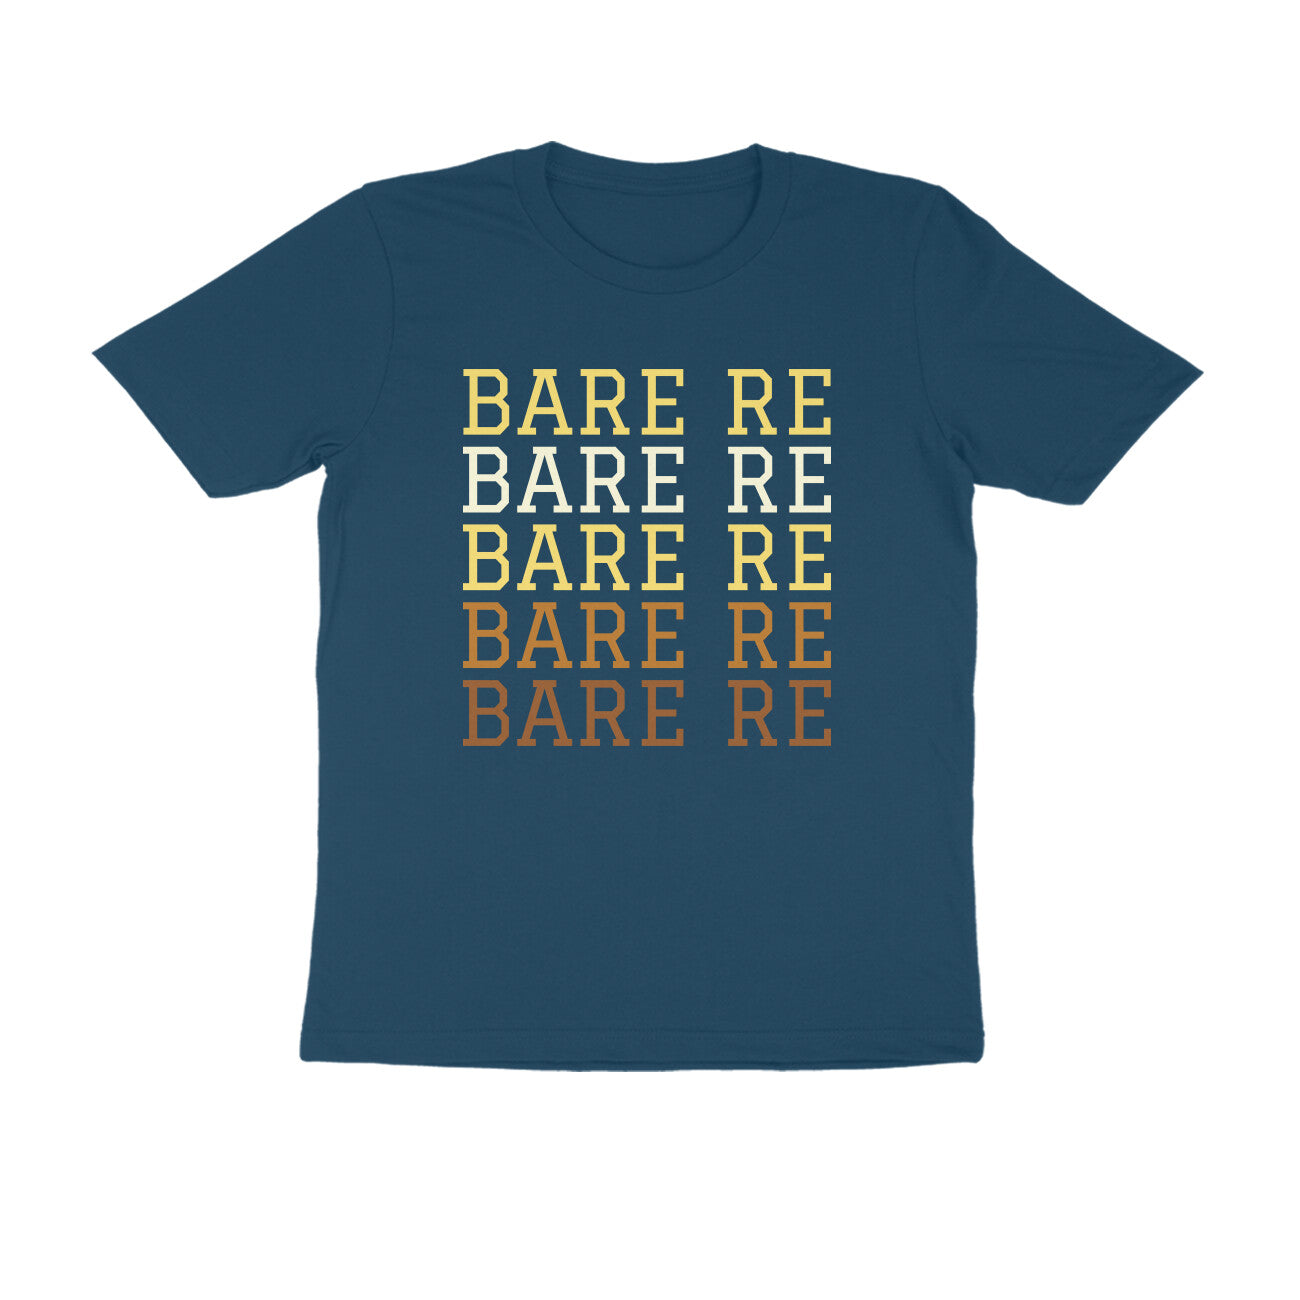 BARE RE MEN'S LIFESTYLE COLLECTION GENT - Goa Shirts